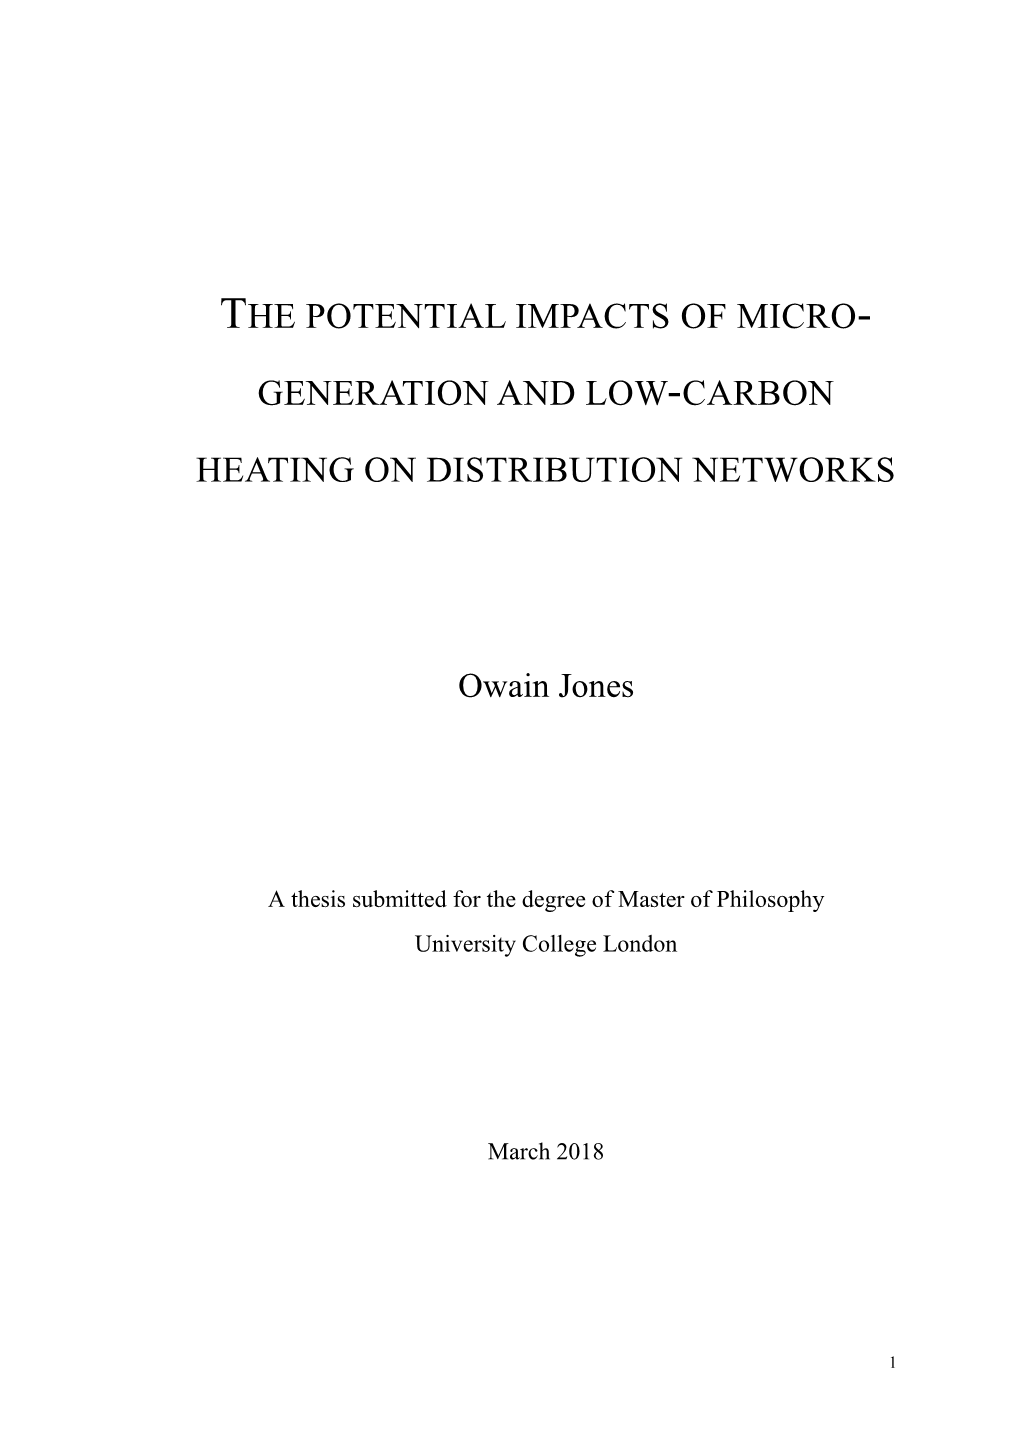 Generation and Low-Carbon Heating on Distribution